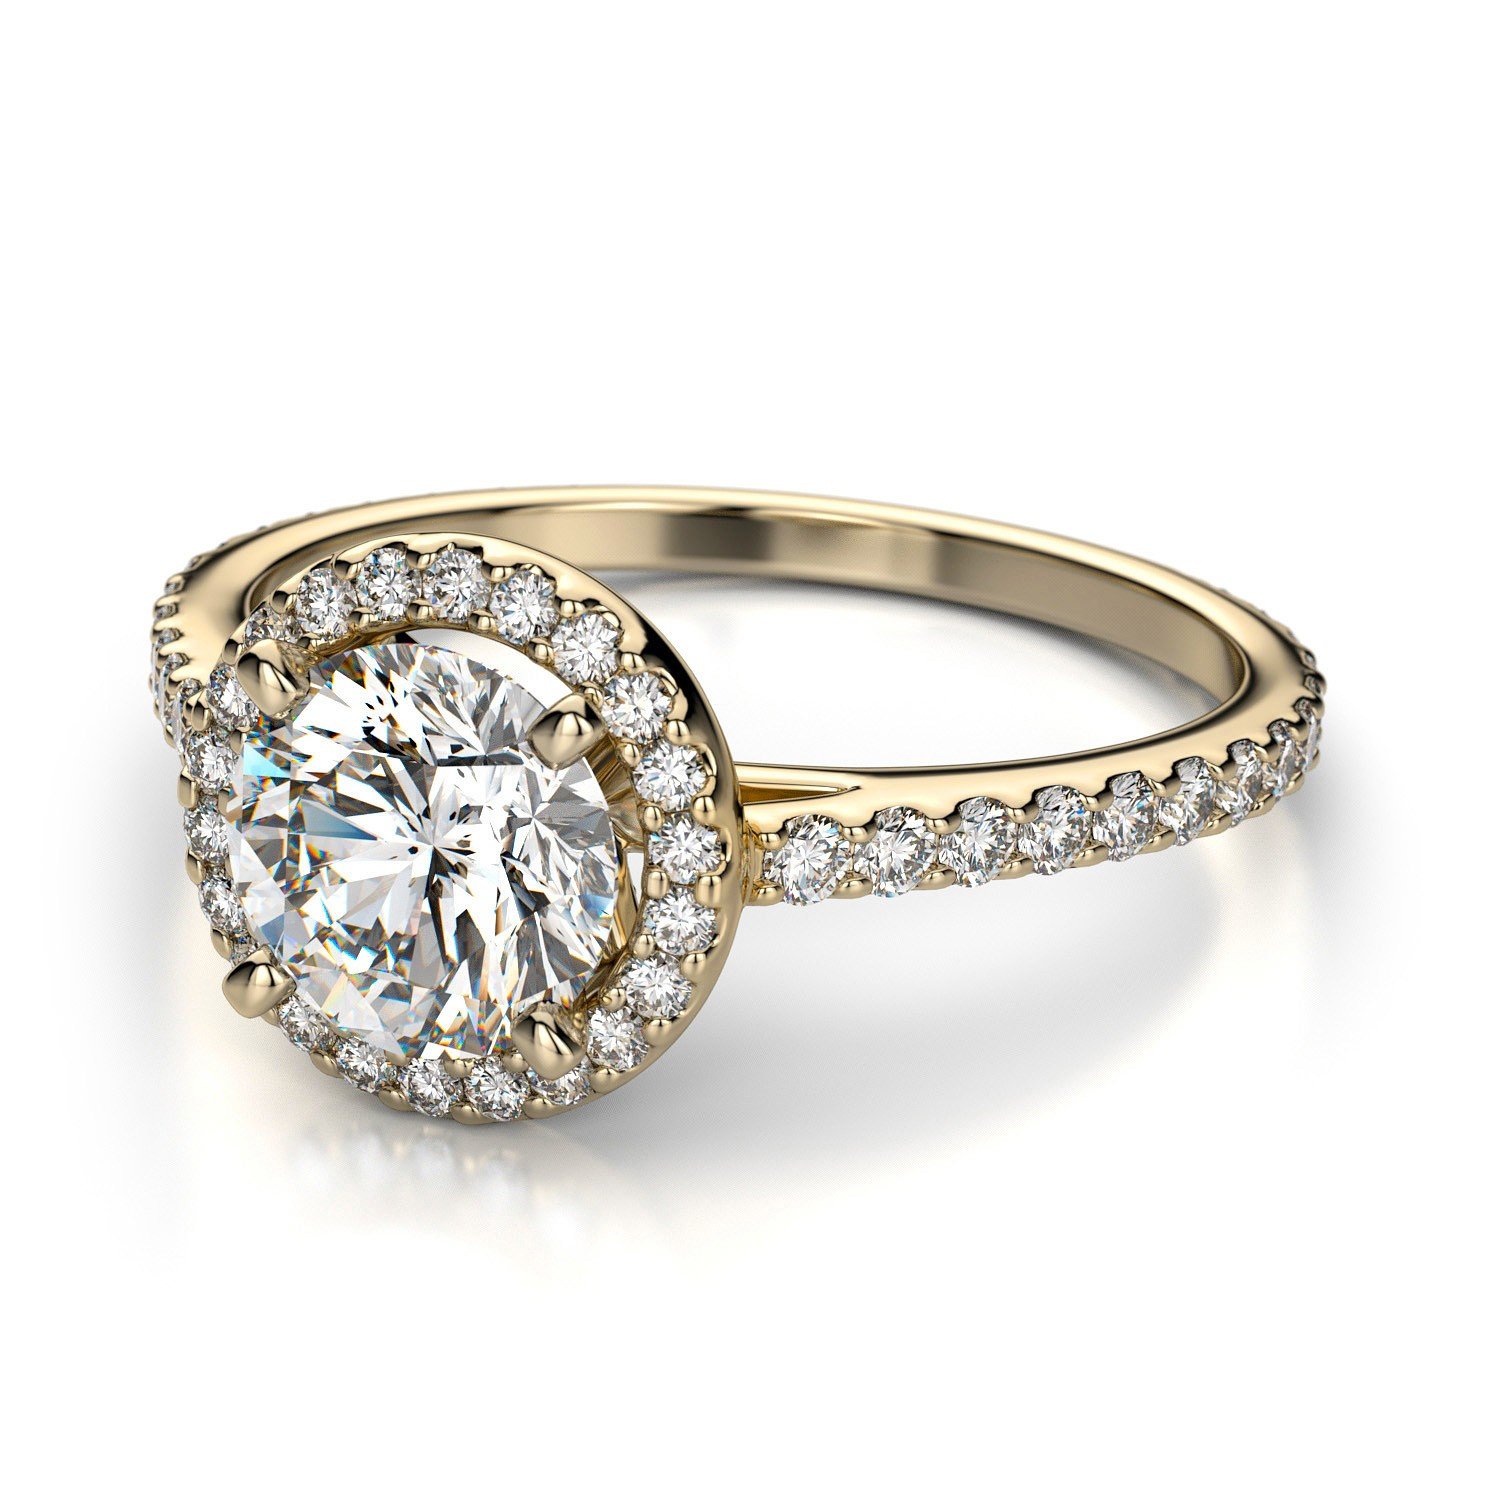 top engagement ring trend for 2015 features yellow and rose gold rings ...